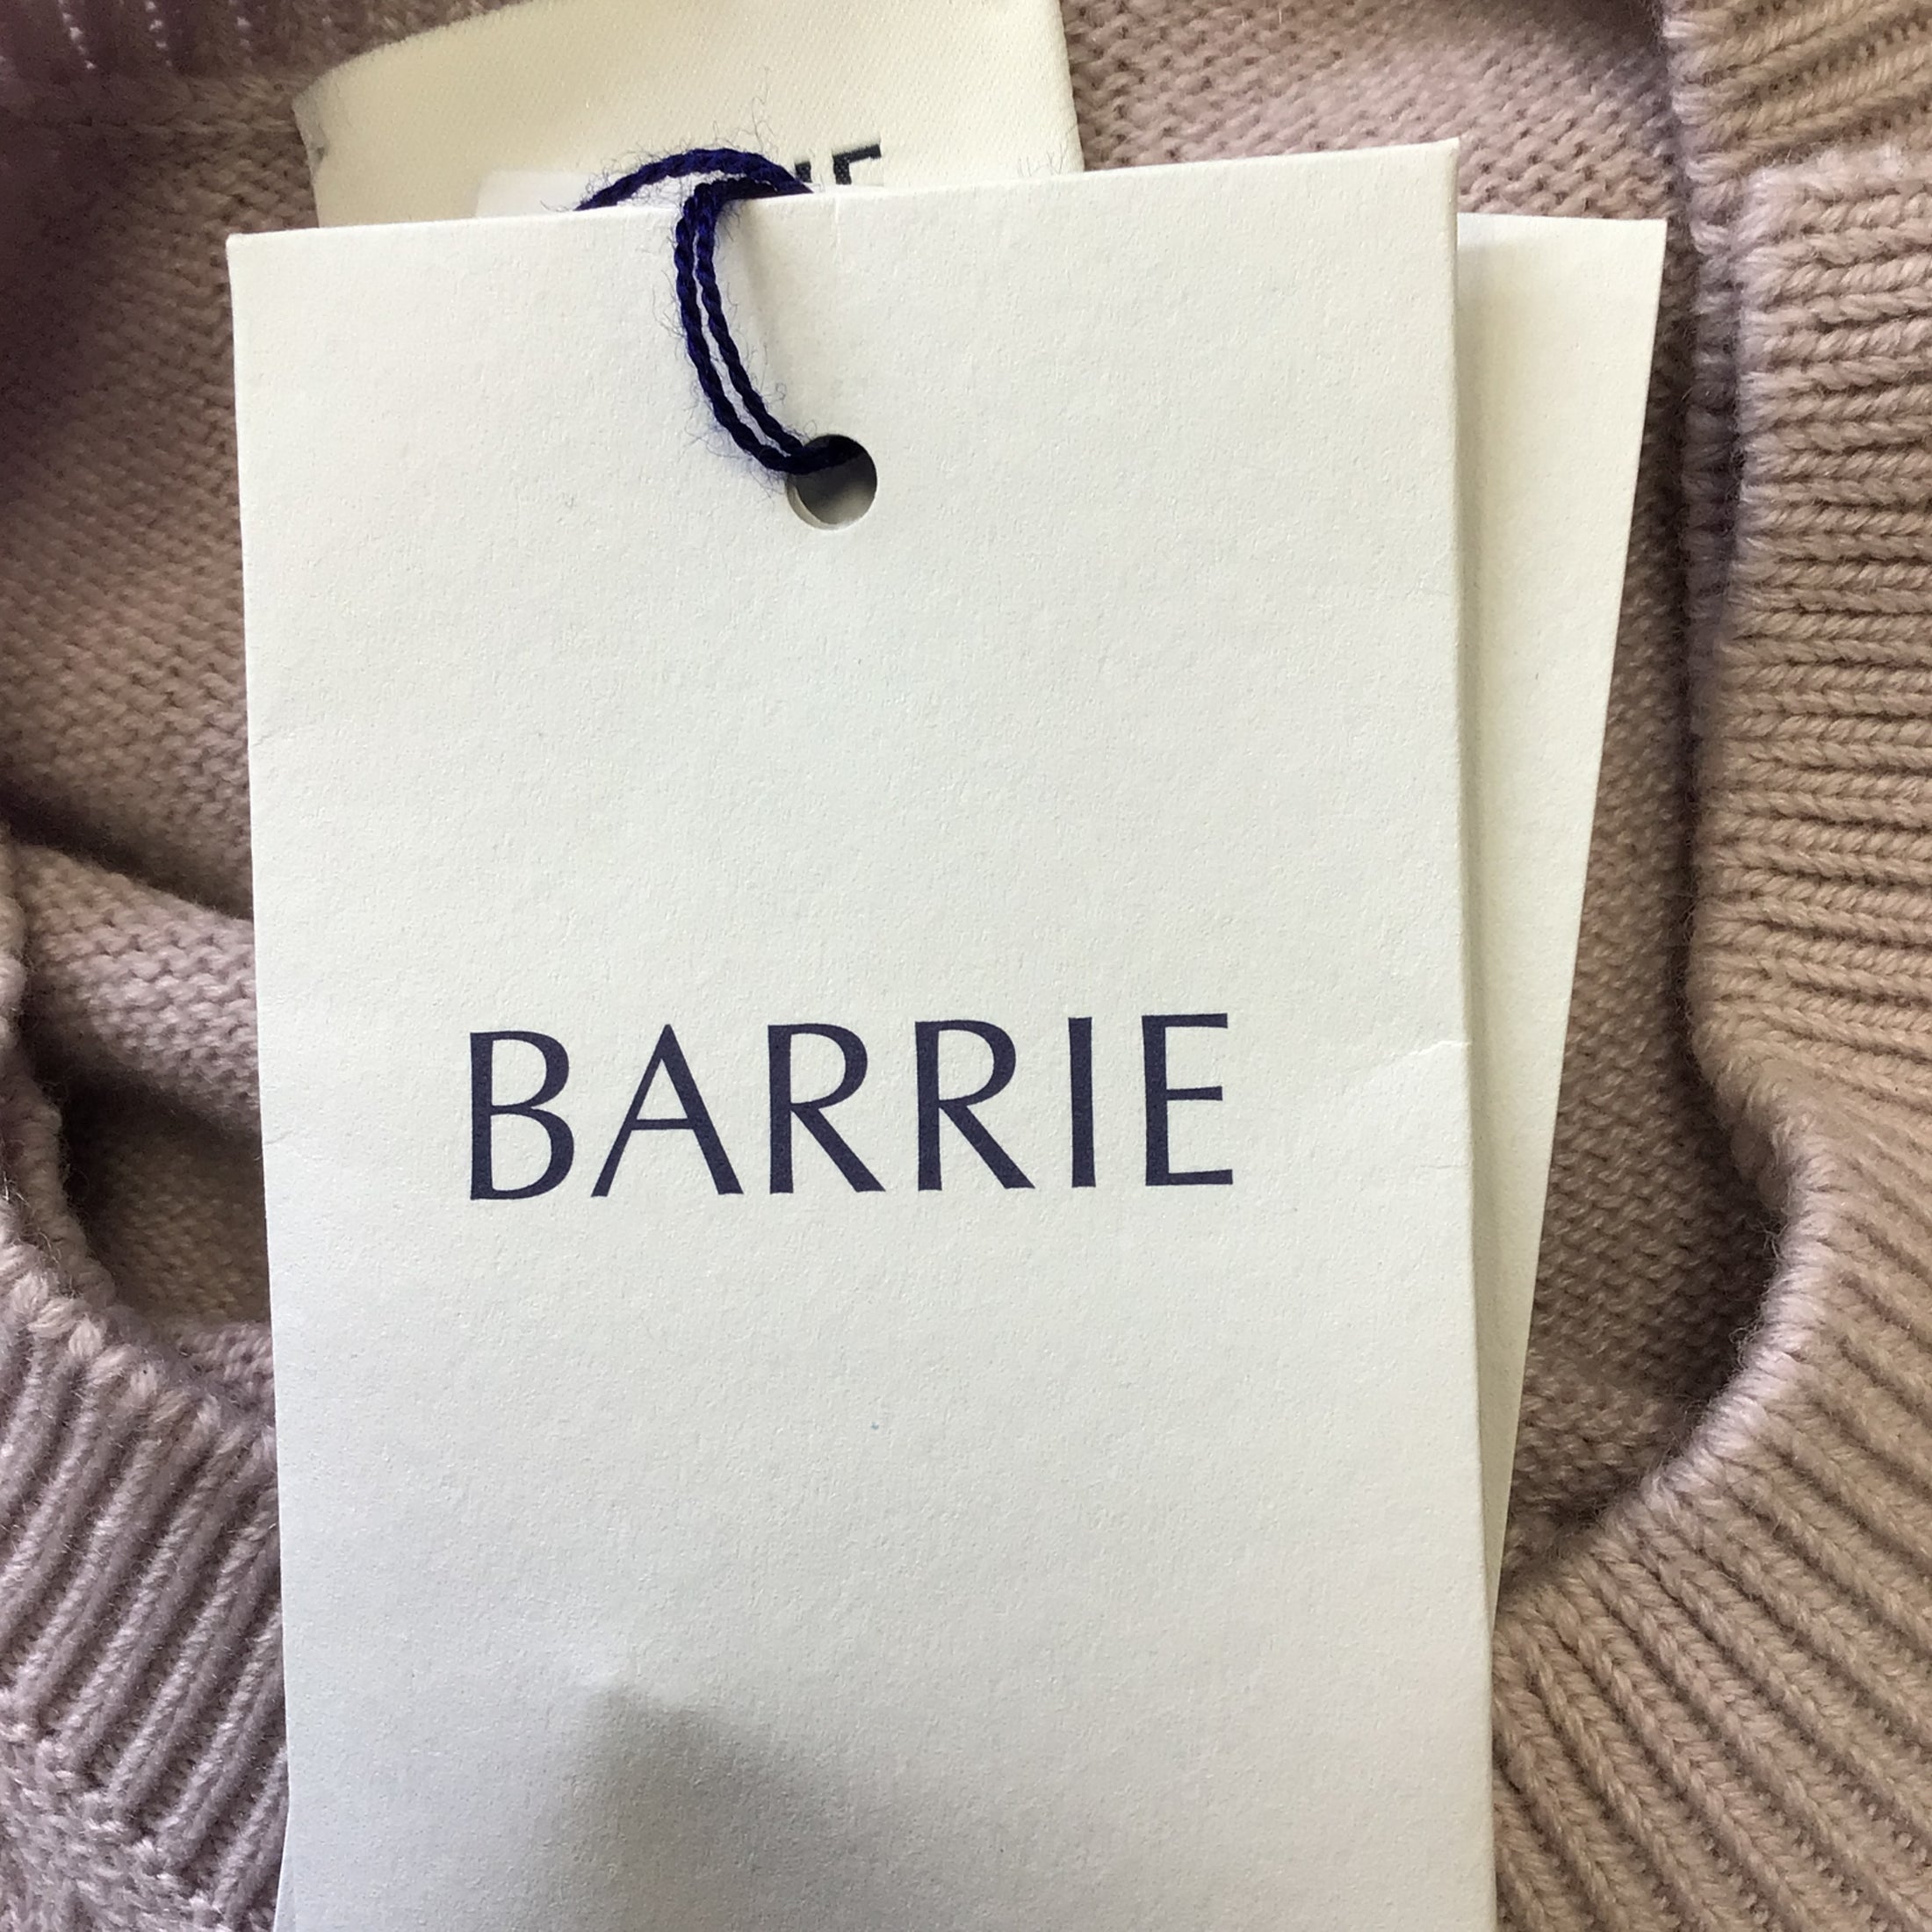 Barrie Lavender Pause Cashmere Knit Cardigan Sweater